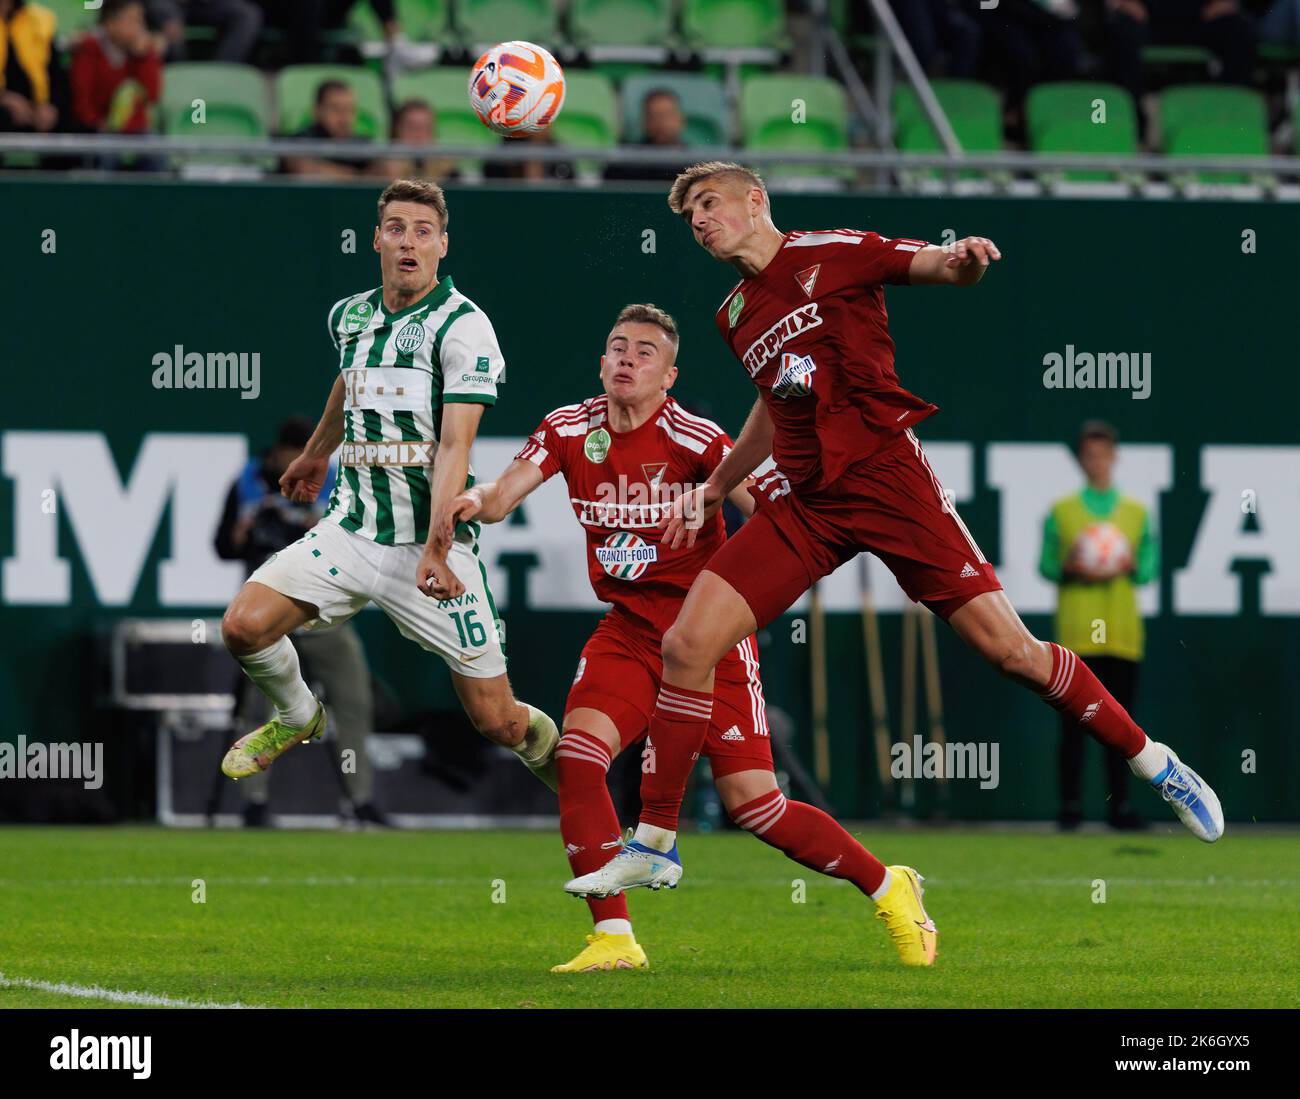 BUDAPEST, HUNGARY - MAY 7: Muhamed Besic of Ferencvarosi TC runs with the  ball during the Hungarian OTP Bank Liga match between Ferencvarosi TC and  MTK Budapest at Groupama Arena on May